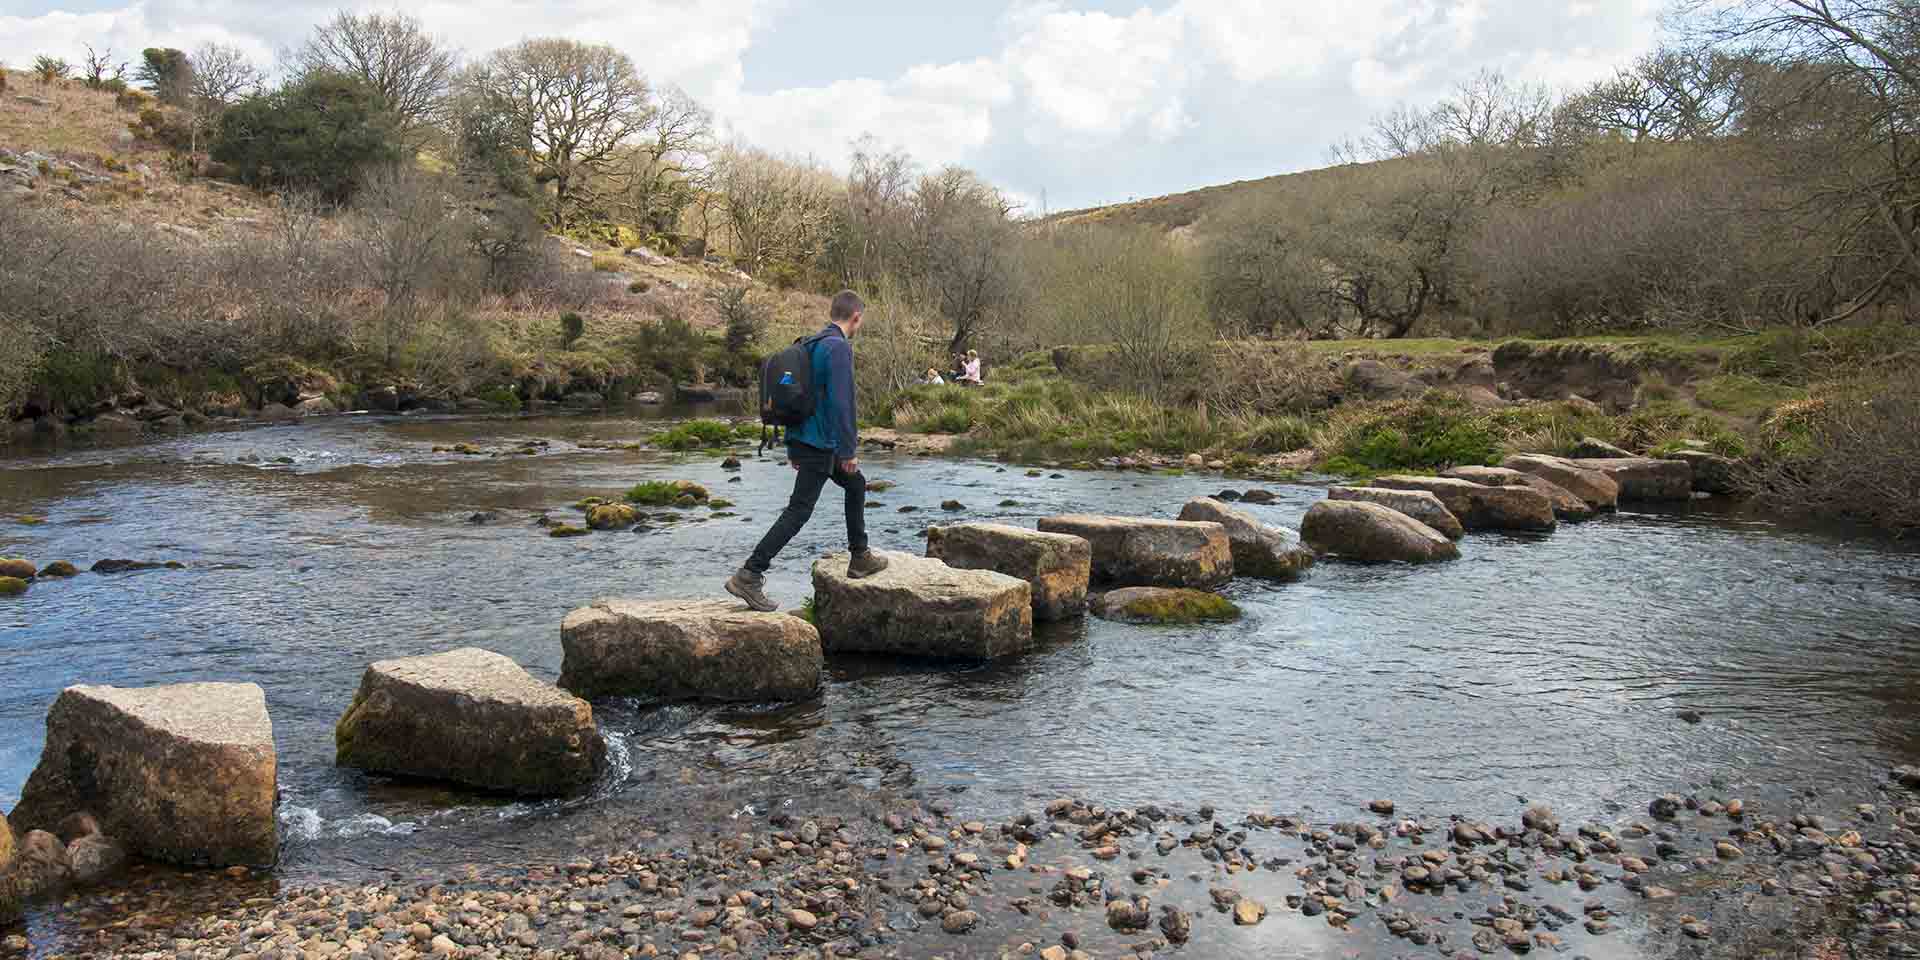 Person crossing large stepping stones over shallow river